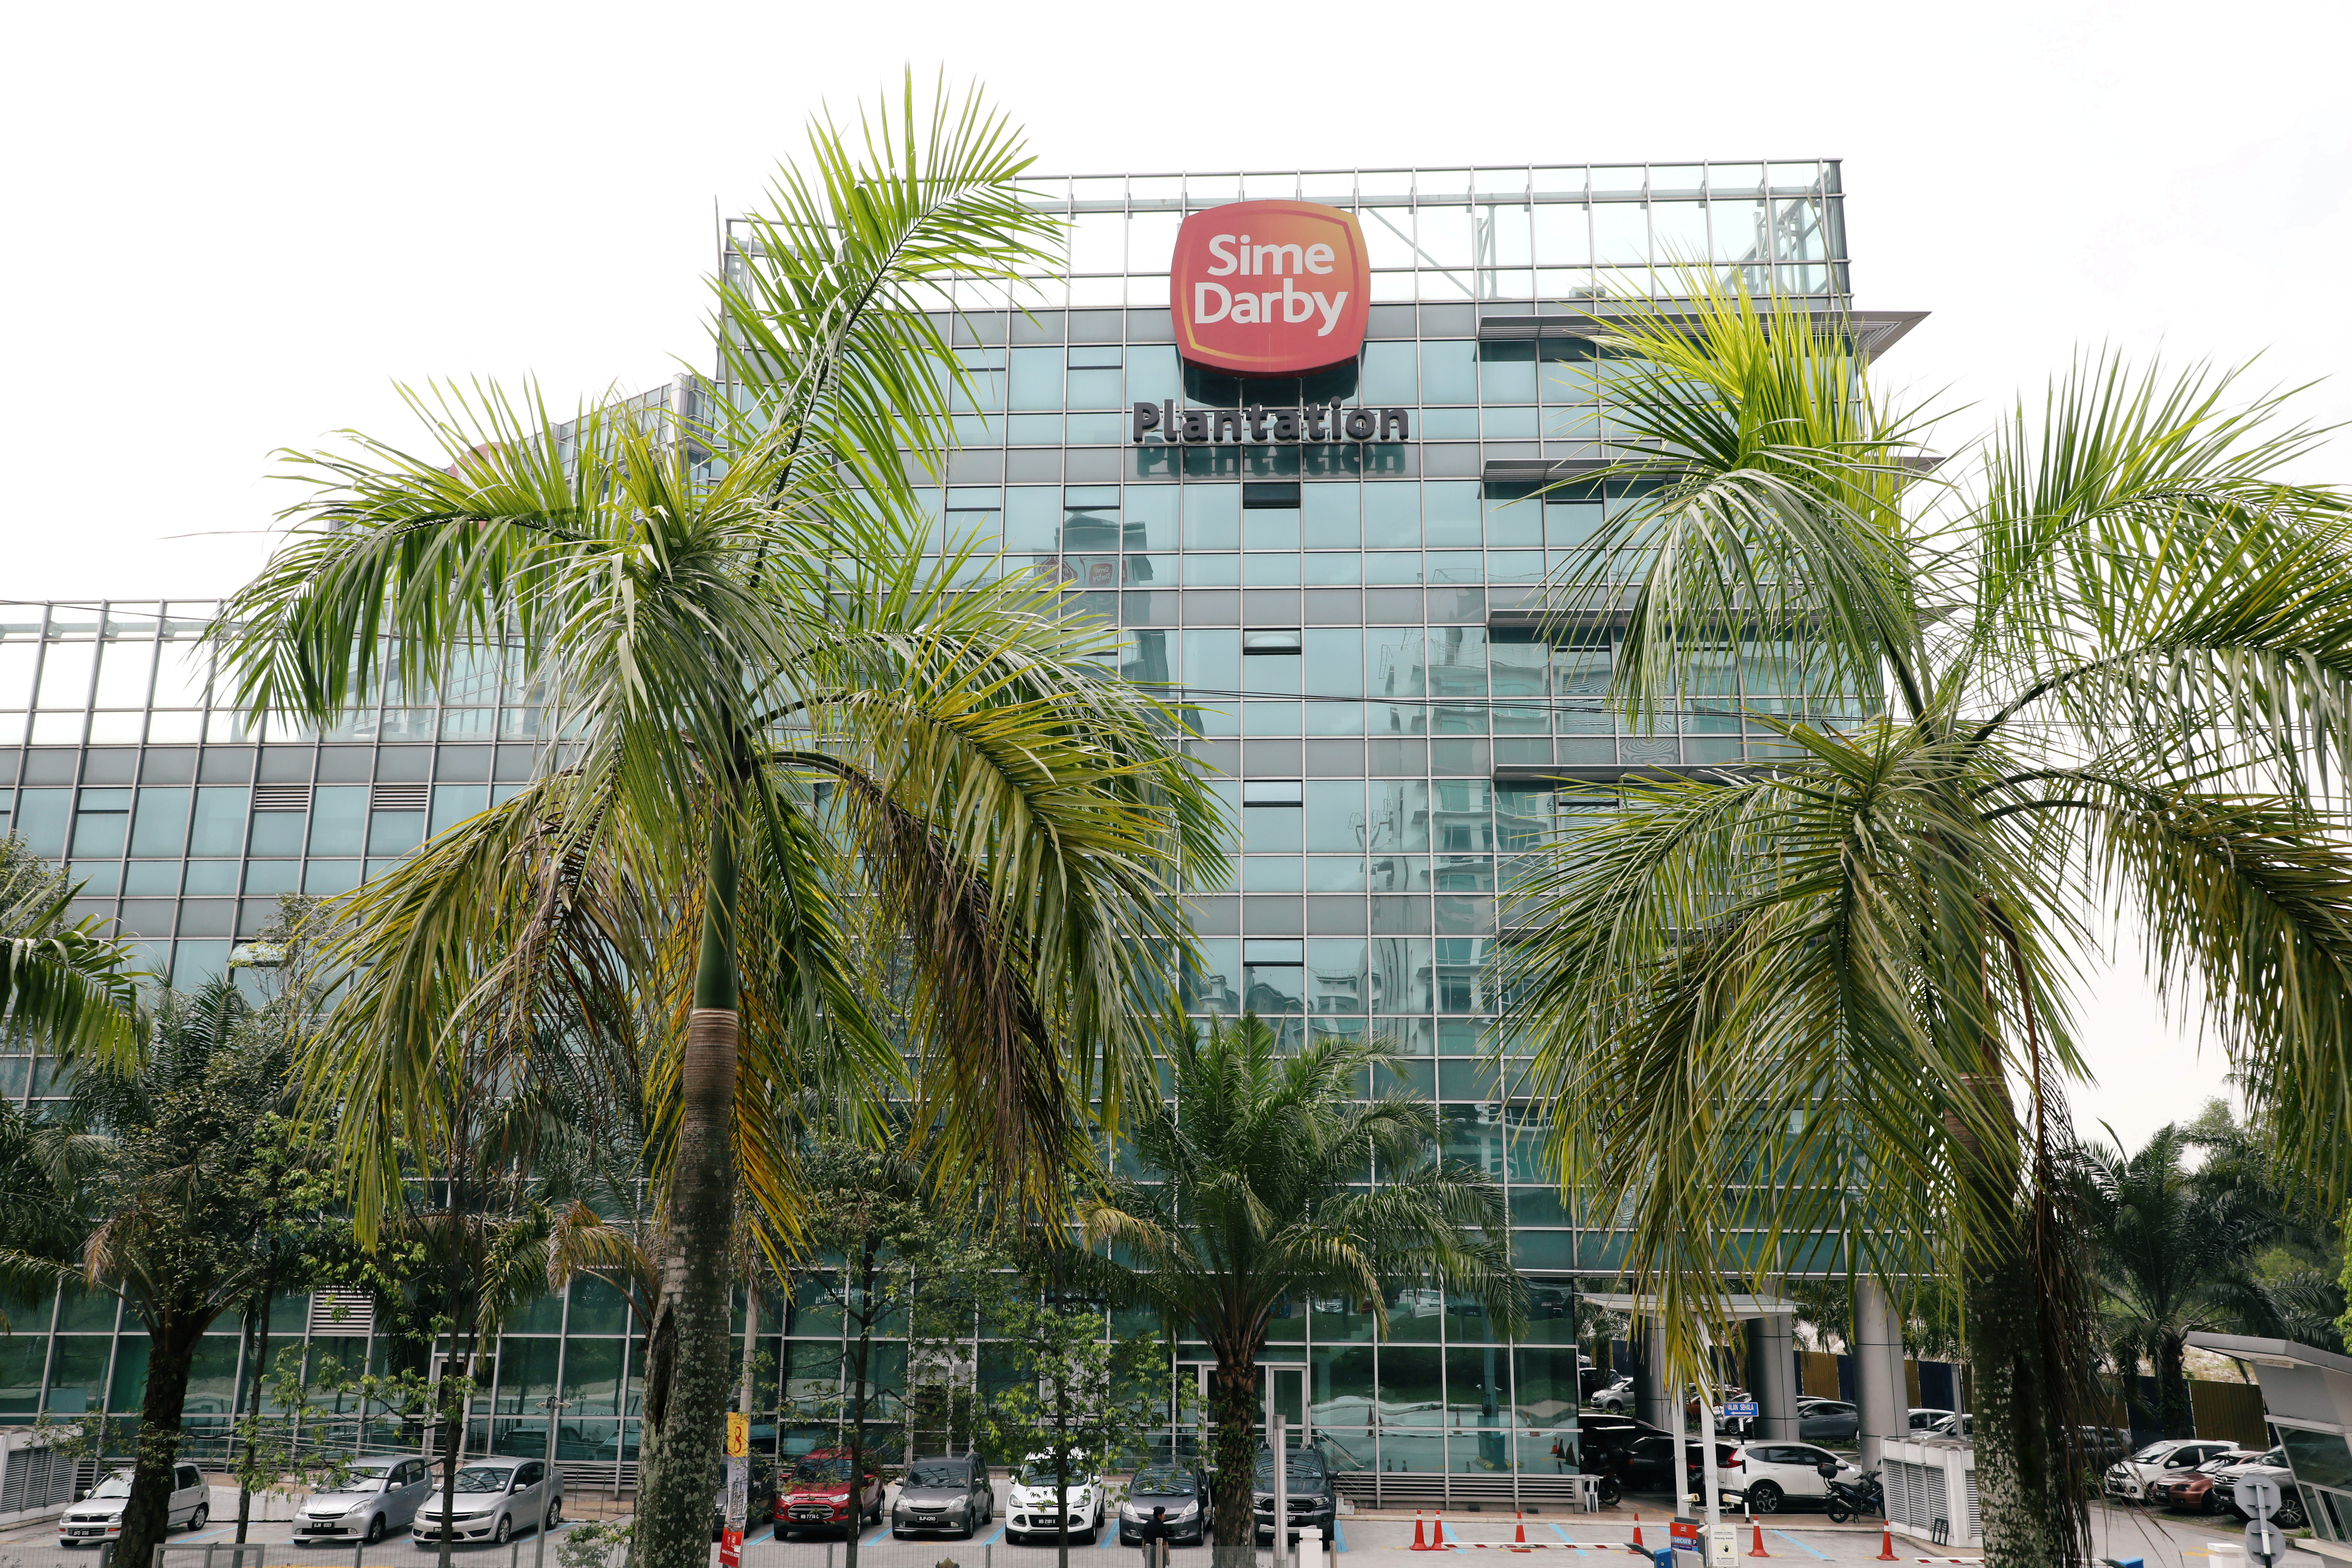 sime darby